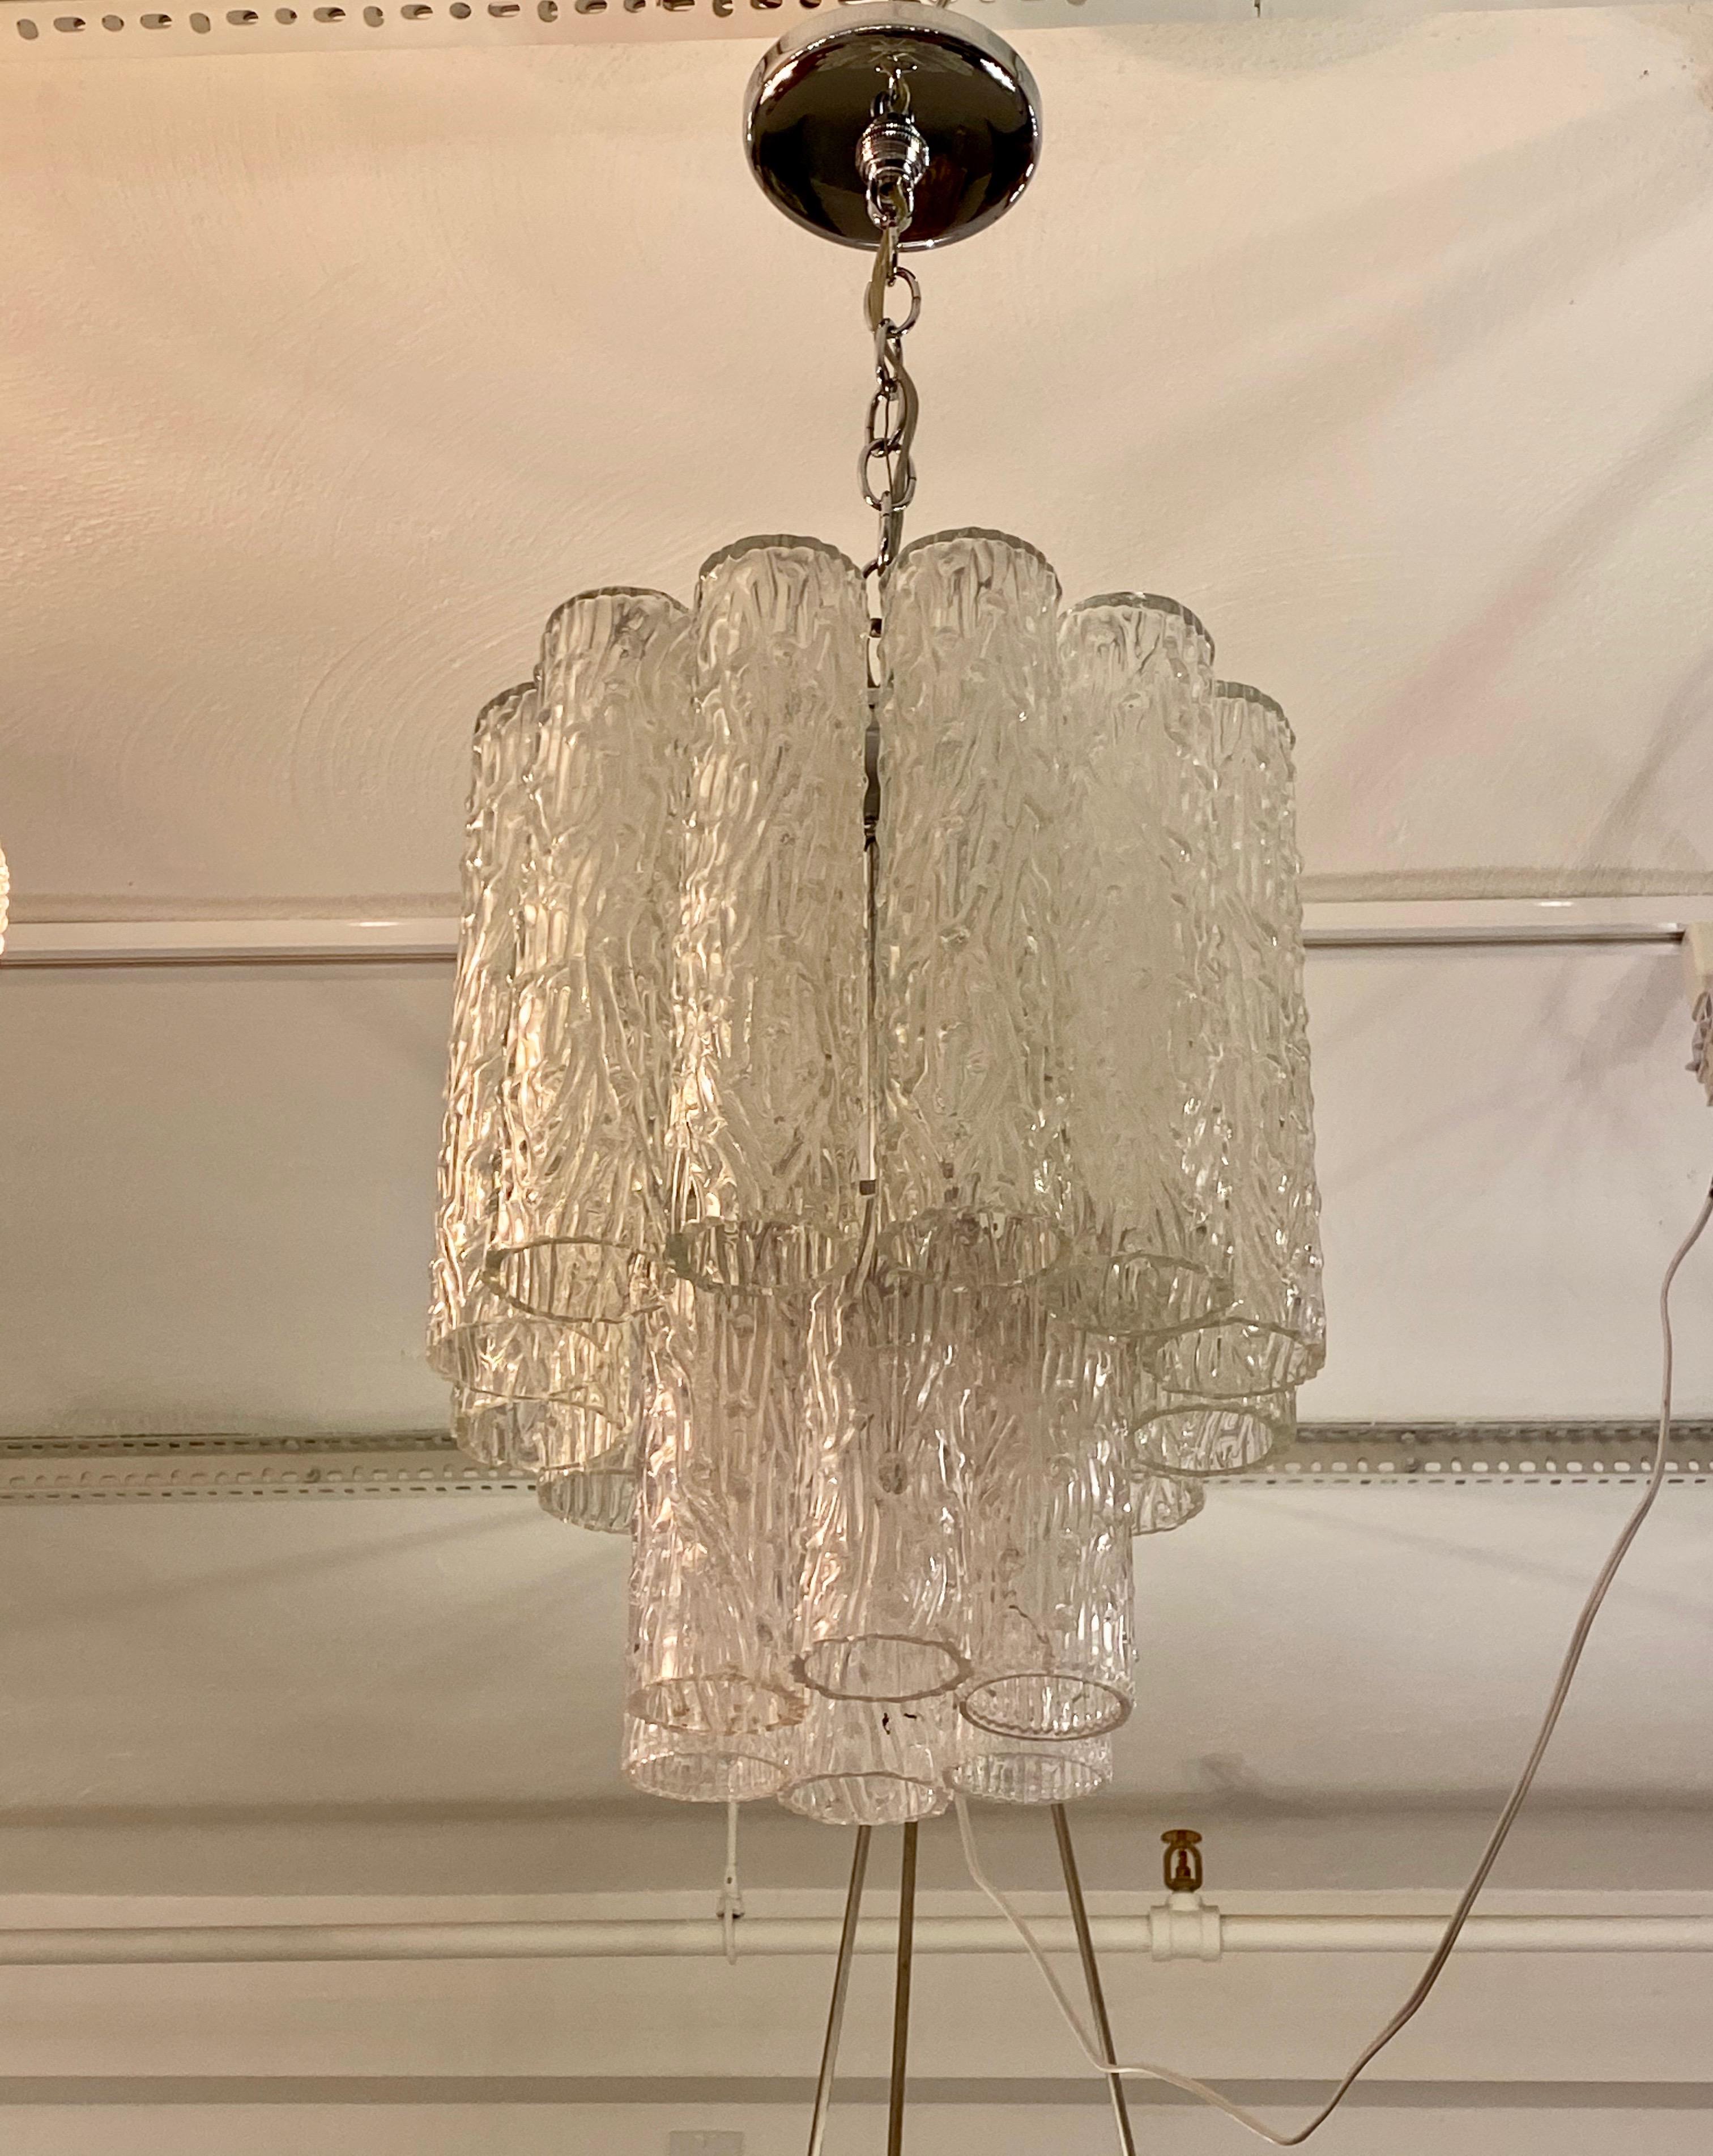 Midcentury two-tiered round chandelier. Consisting of tronchi cylindrical glass pieces. The glass Tronchi hangs from a nickel (silver) frame as pictured. Any amount of chain can be added for custom hanging length. Has been rewired for American use